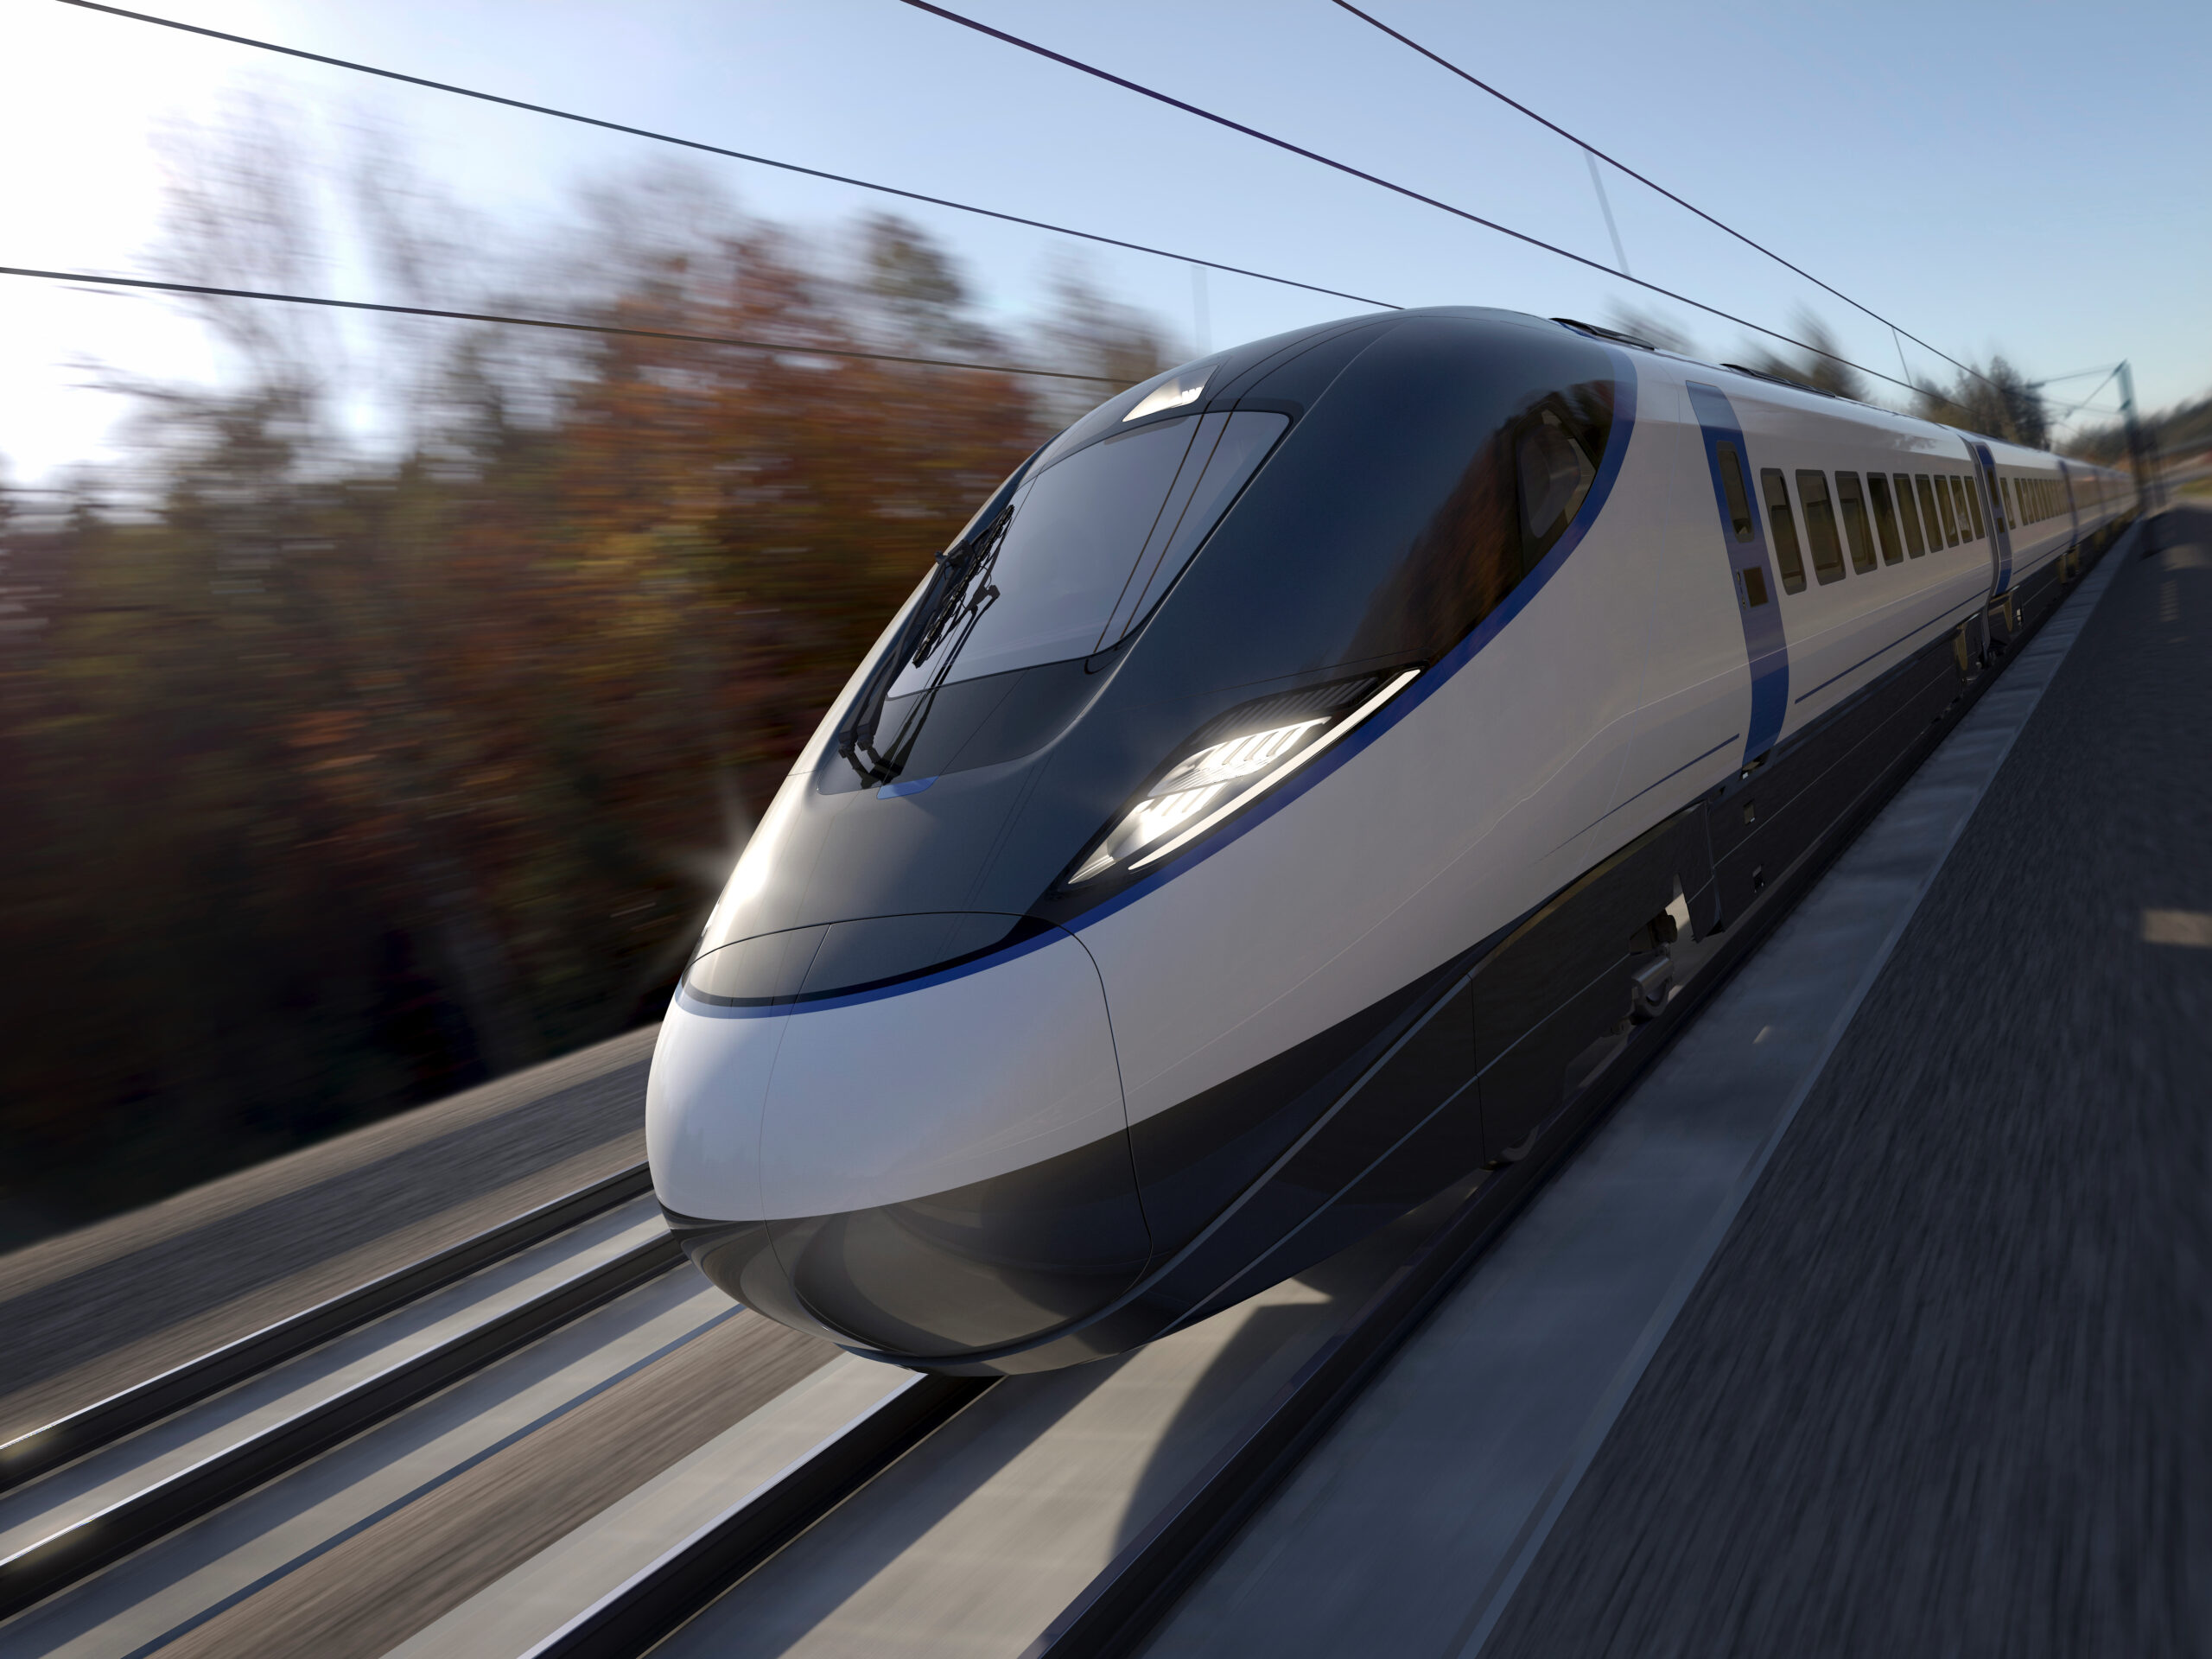 Rendering of an HS2 train to be built by the Alstom-Hitachi Rail JV